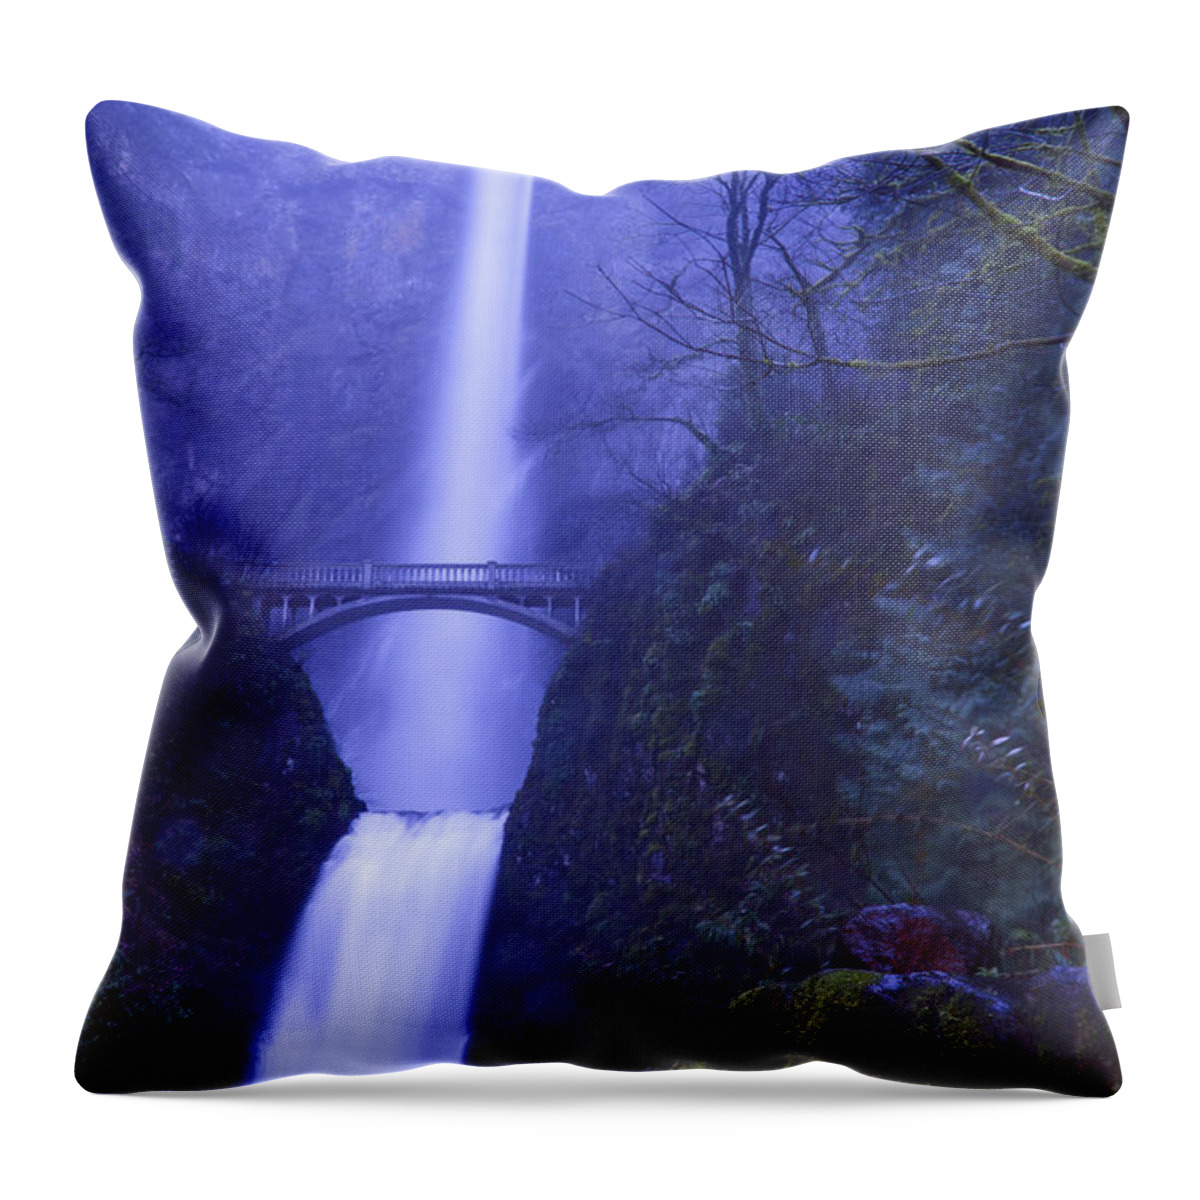 Multnomah Falls Throw Pillow featuring the photograph Blue Flow by Kellie Prowse